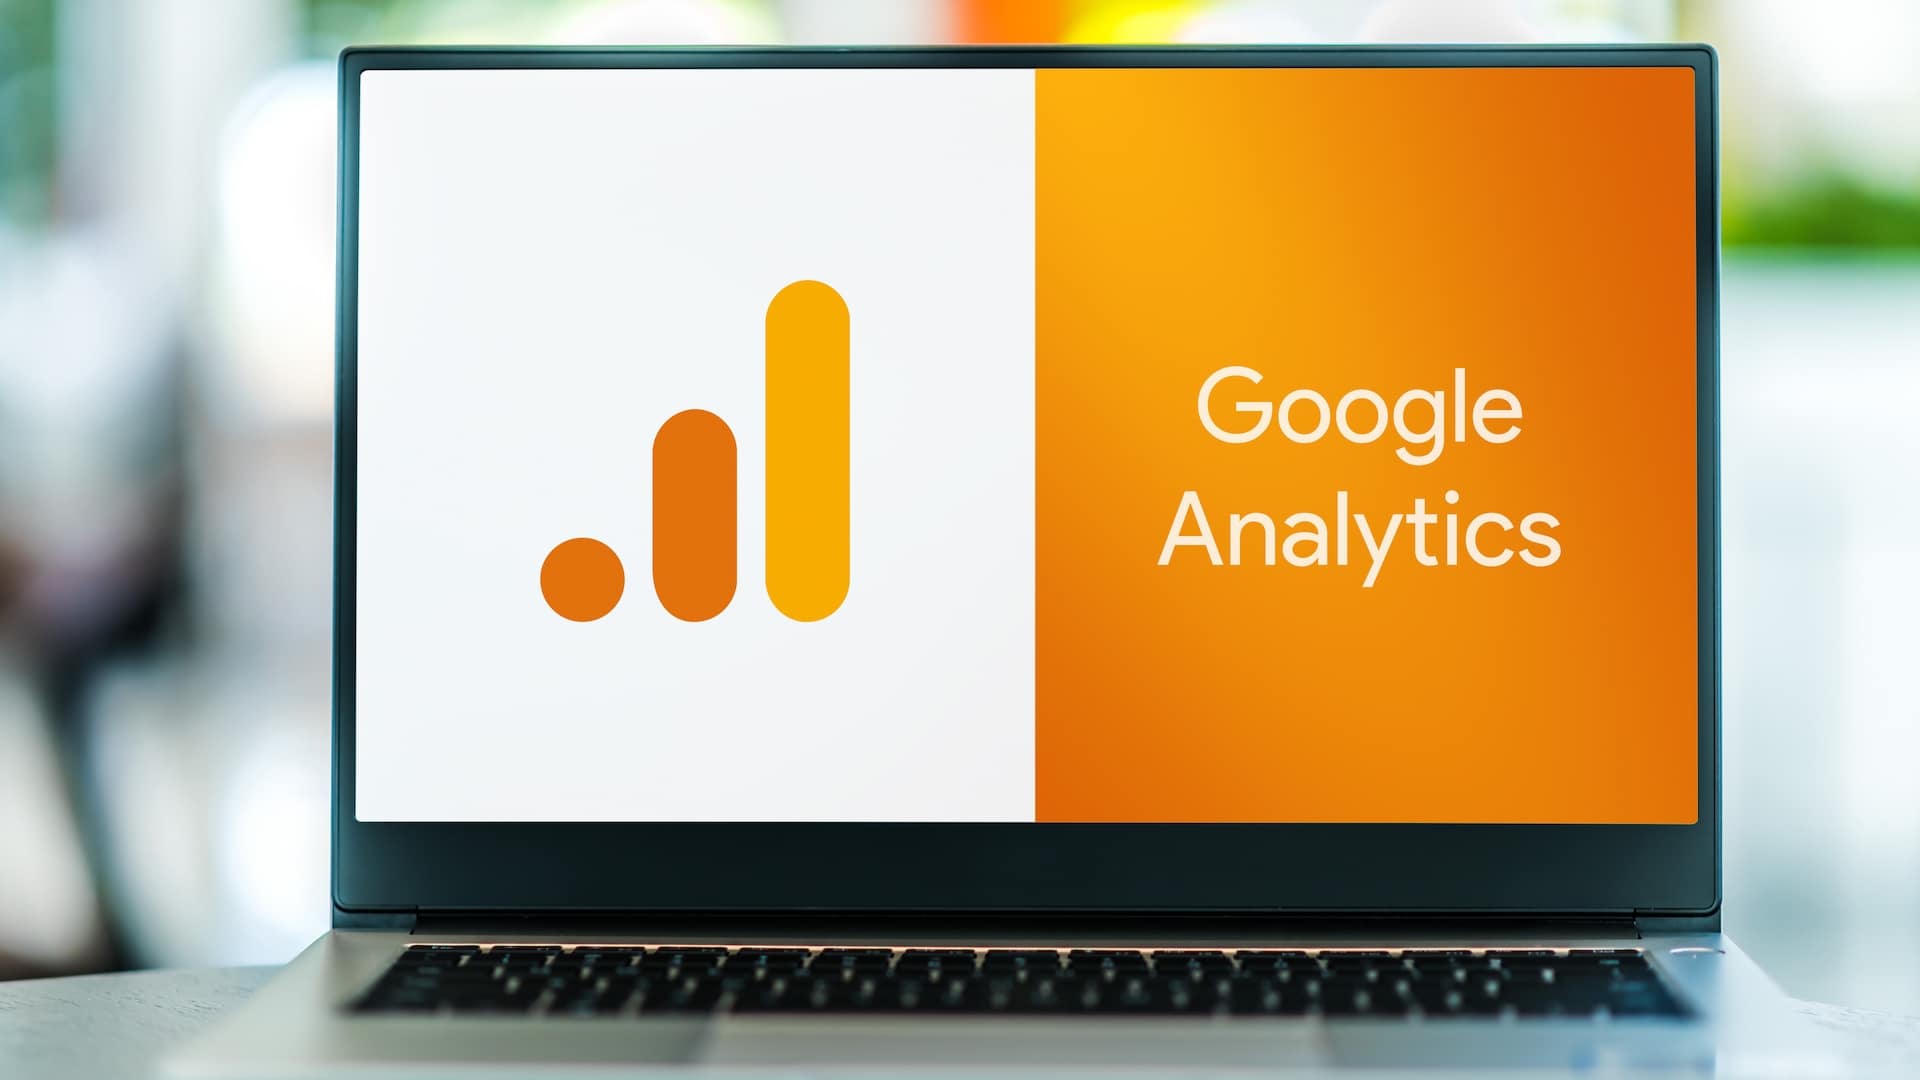 #5 new features coming to Google Analytics 4